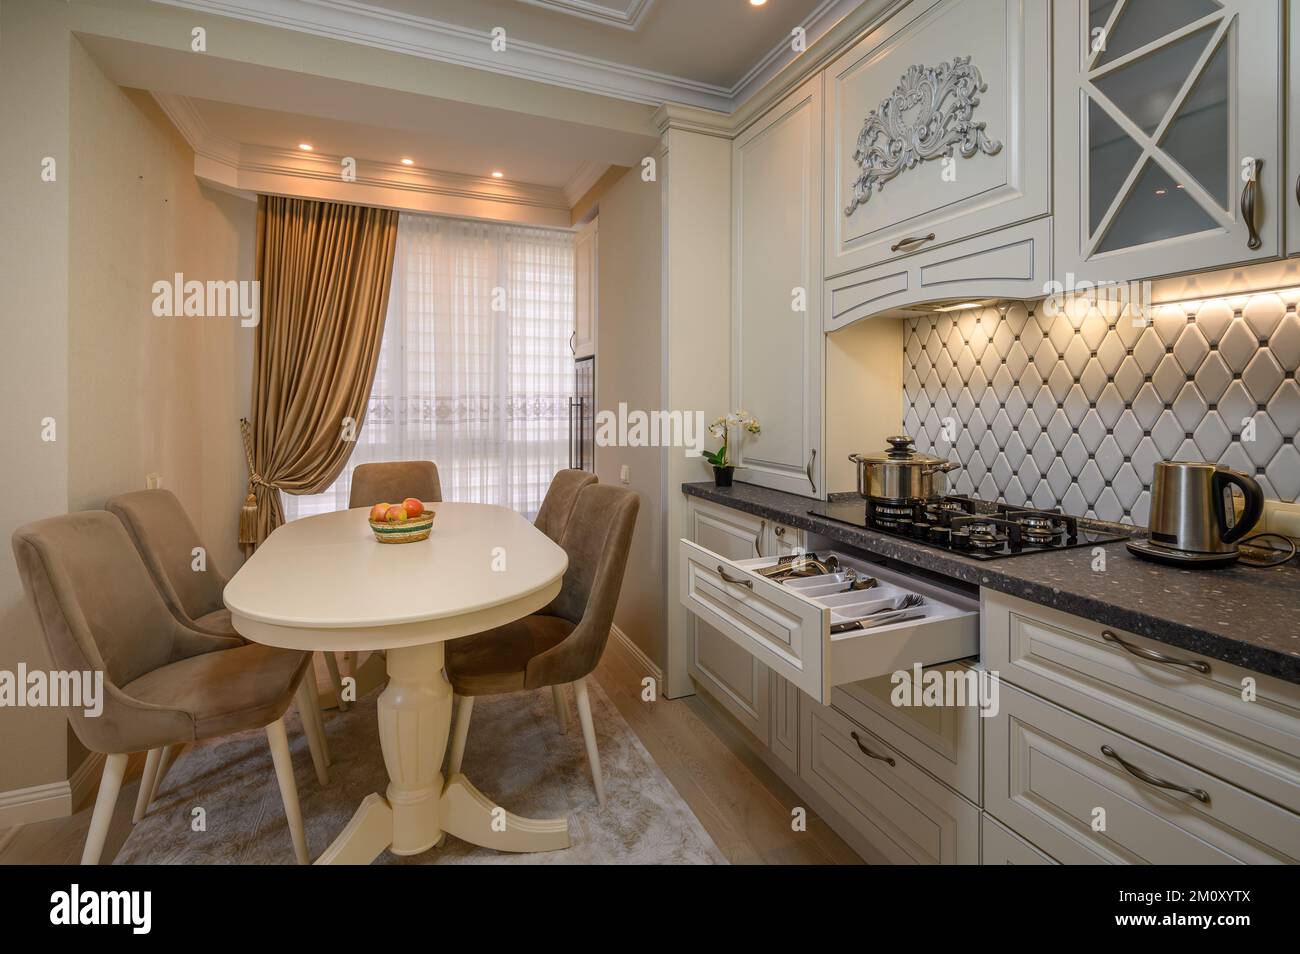 Inviting beige kitchen with a classic design Stock Photo